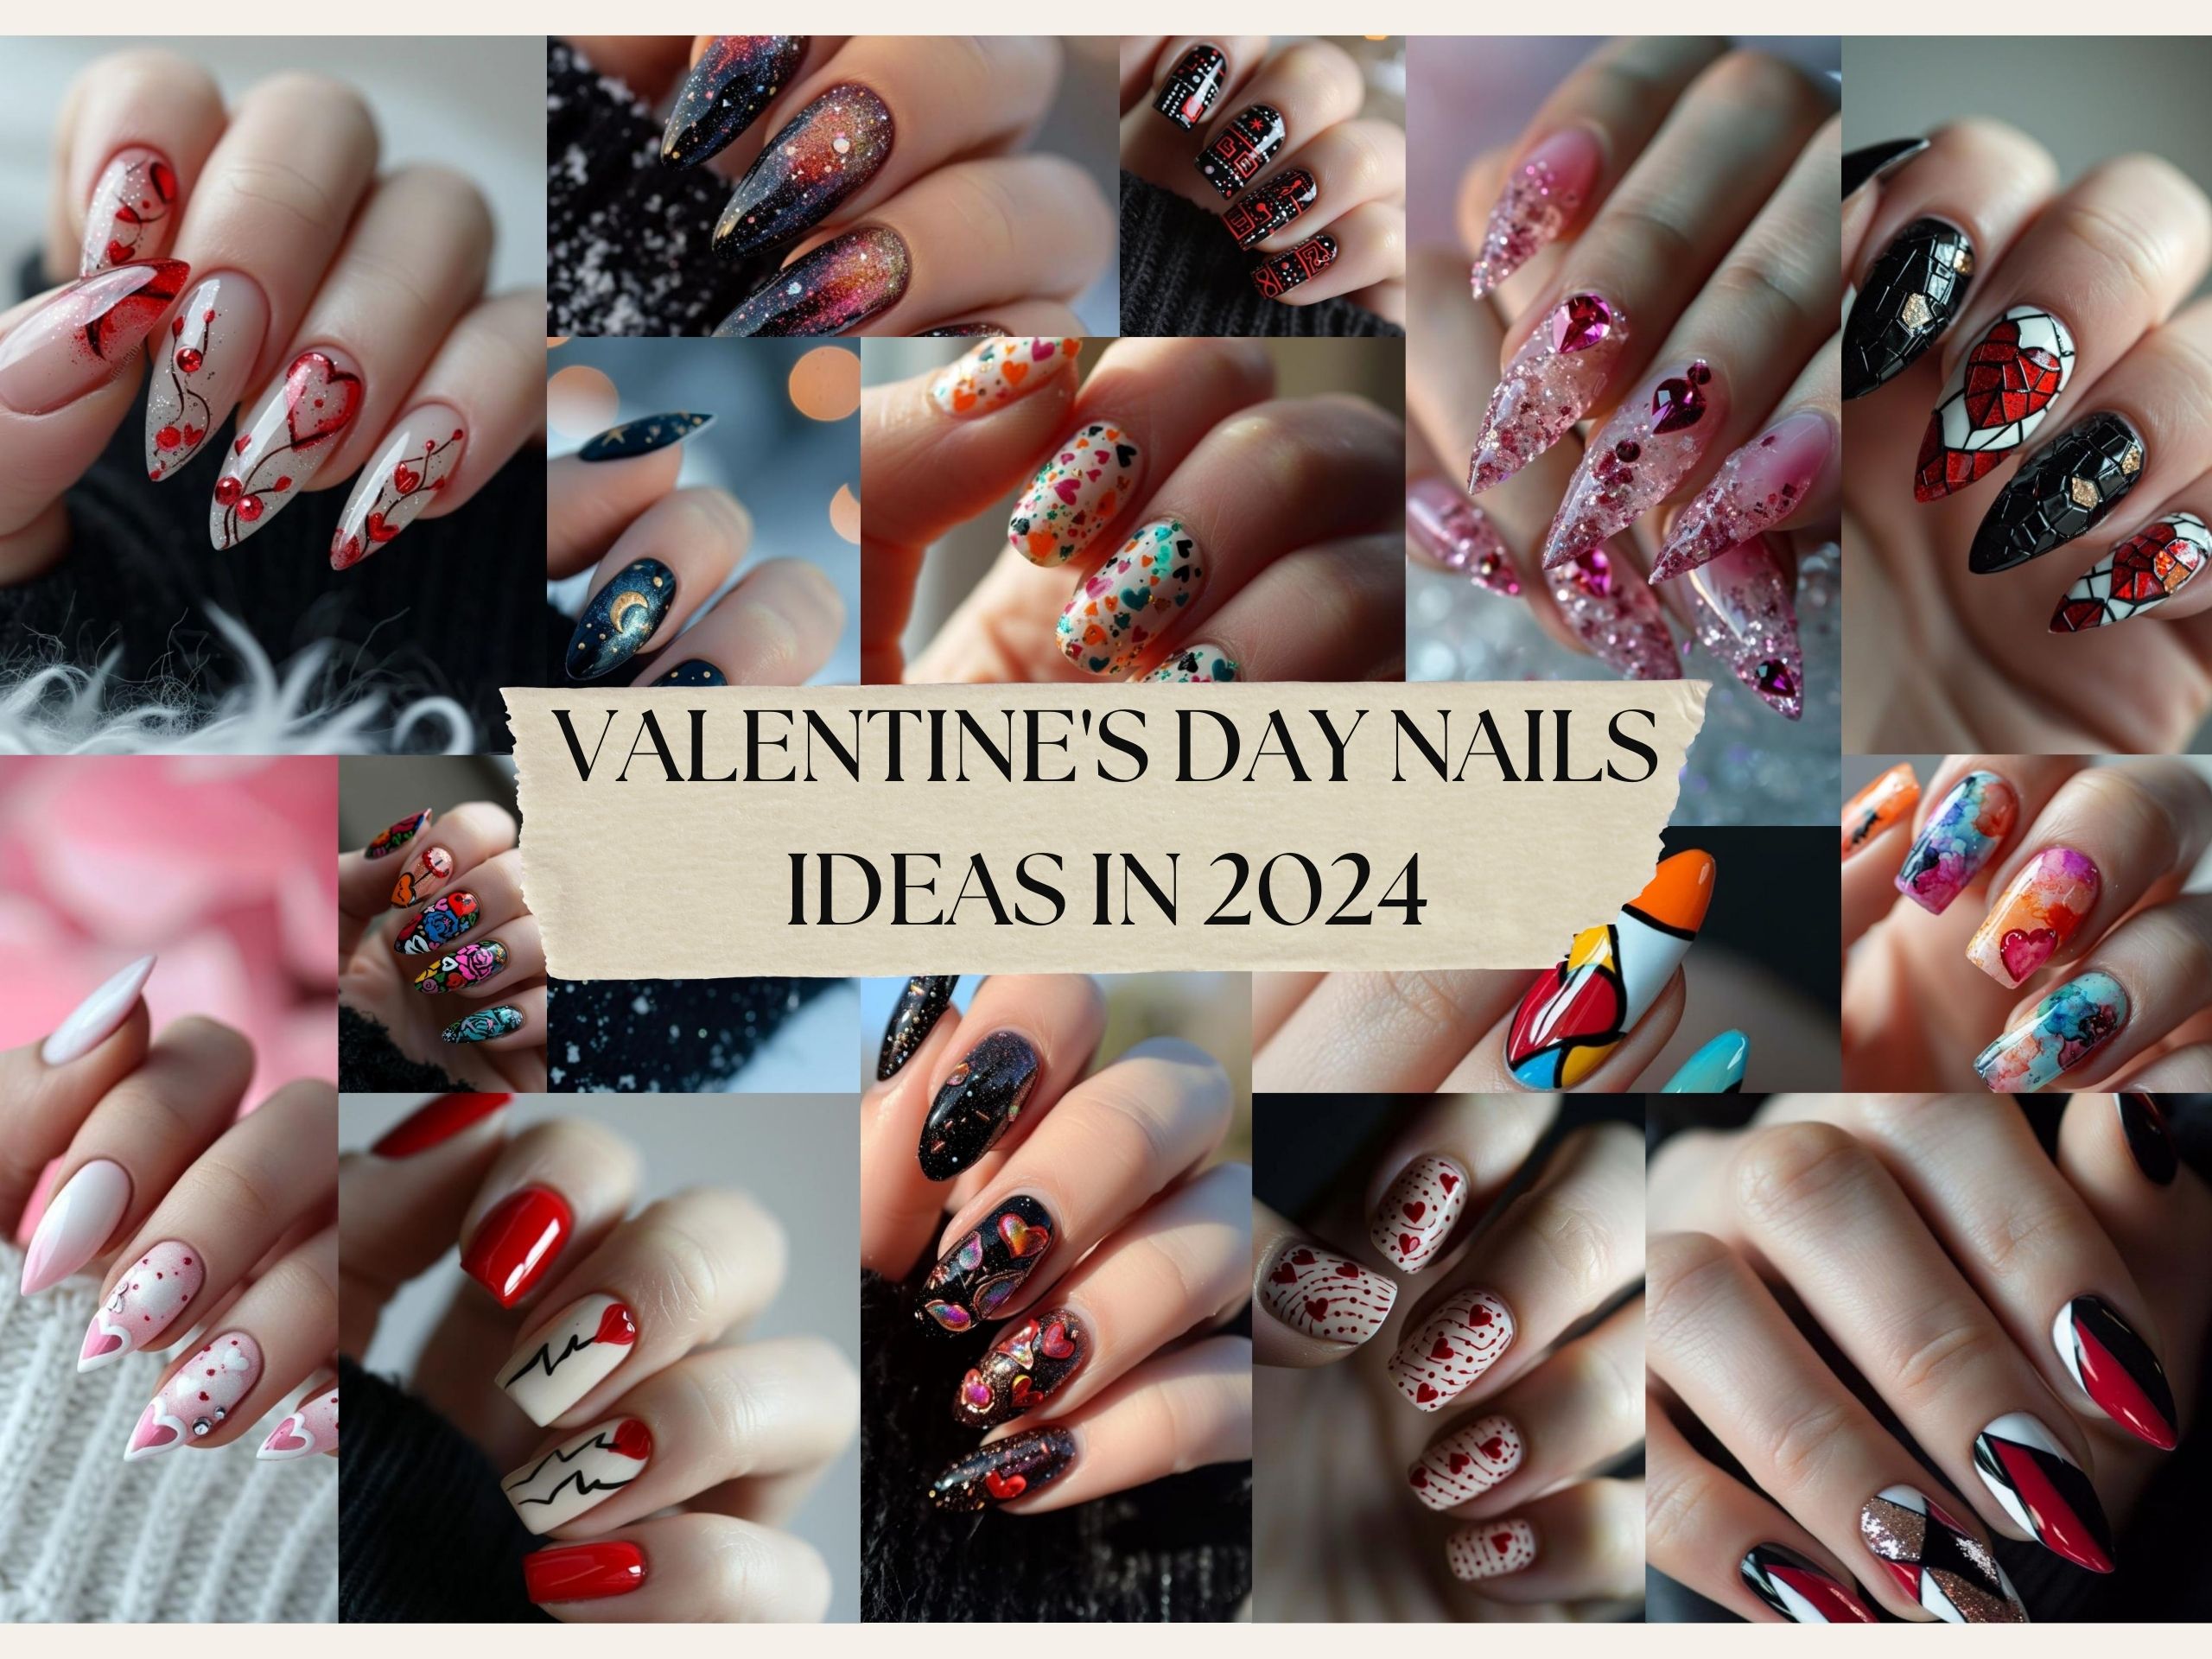 Valentine's Day Nails ideas in 2024